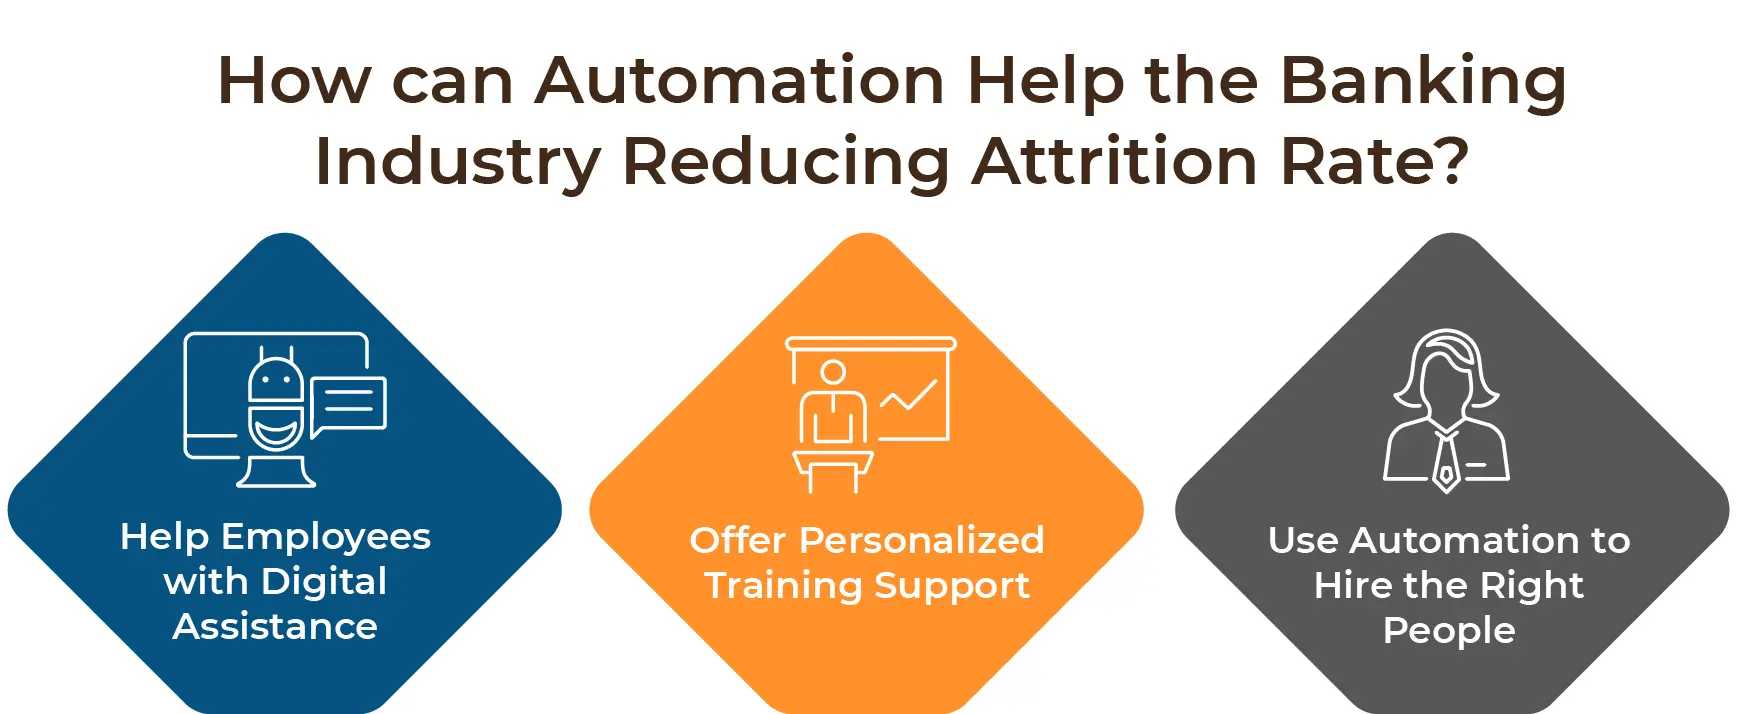 How can Automation Help the Banking Industry Reducing Attrition Rate?